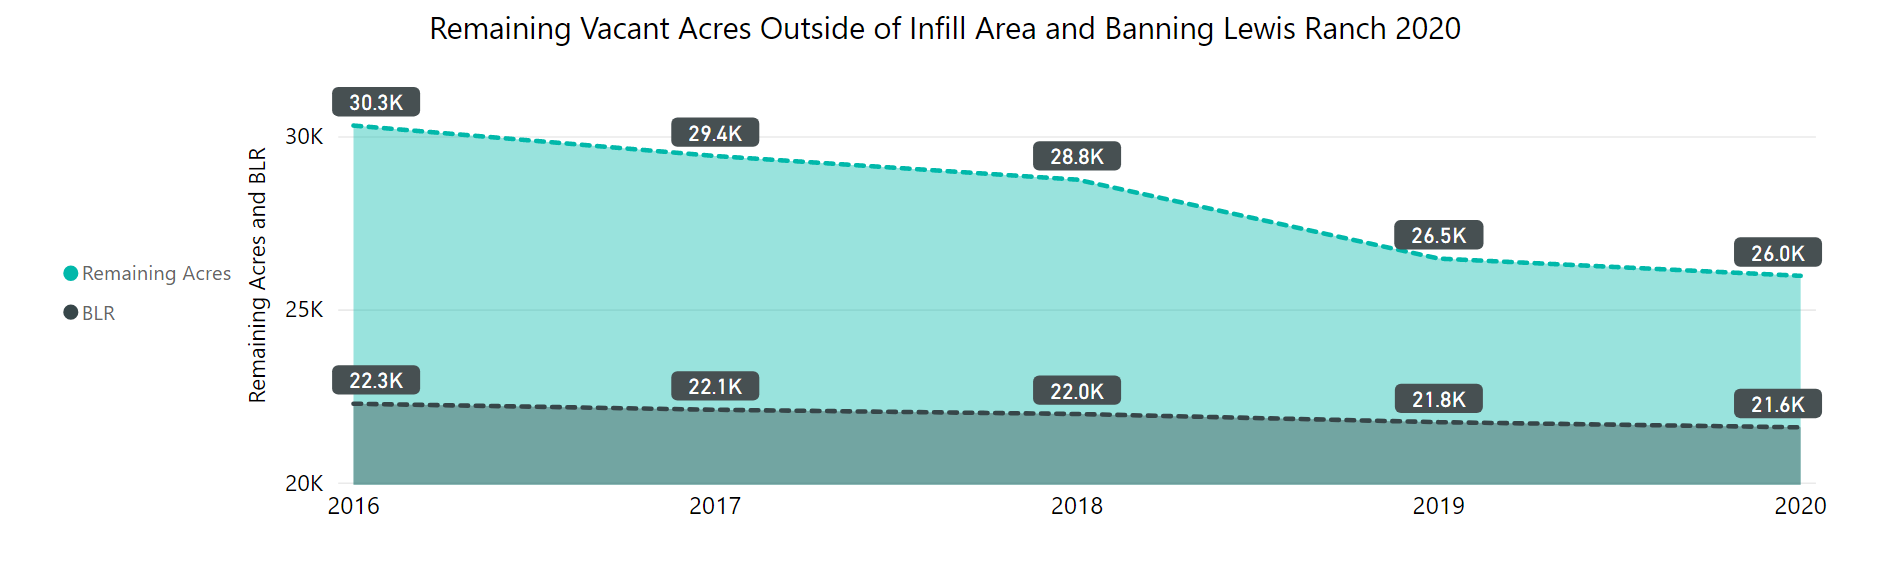 Remaining vacant acres outside on infill area and banning Lewis ranch by year 2016 to 2020. remaining acres decreased each year from 30.0k in 2016 to 26.0 in 2020. vacant acres in banning lewis ranch decreased from 22.3k to 21.6k in 2020. 